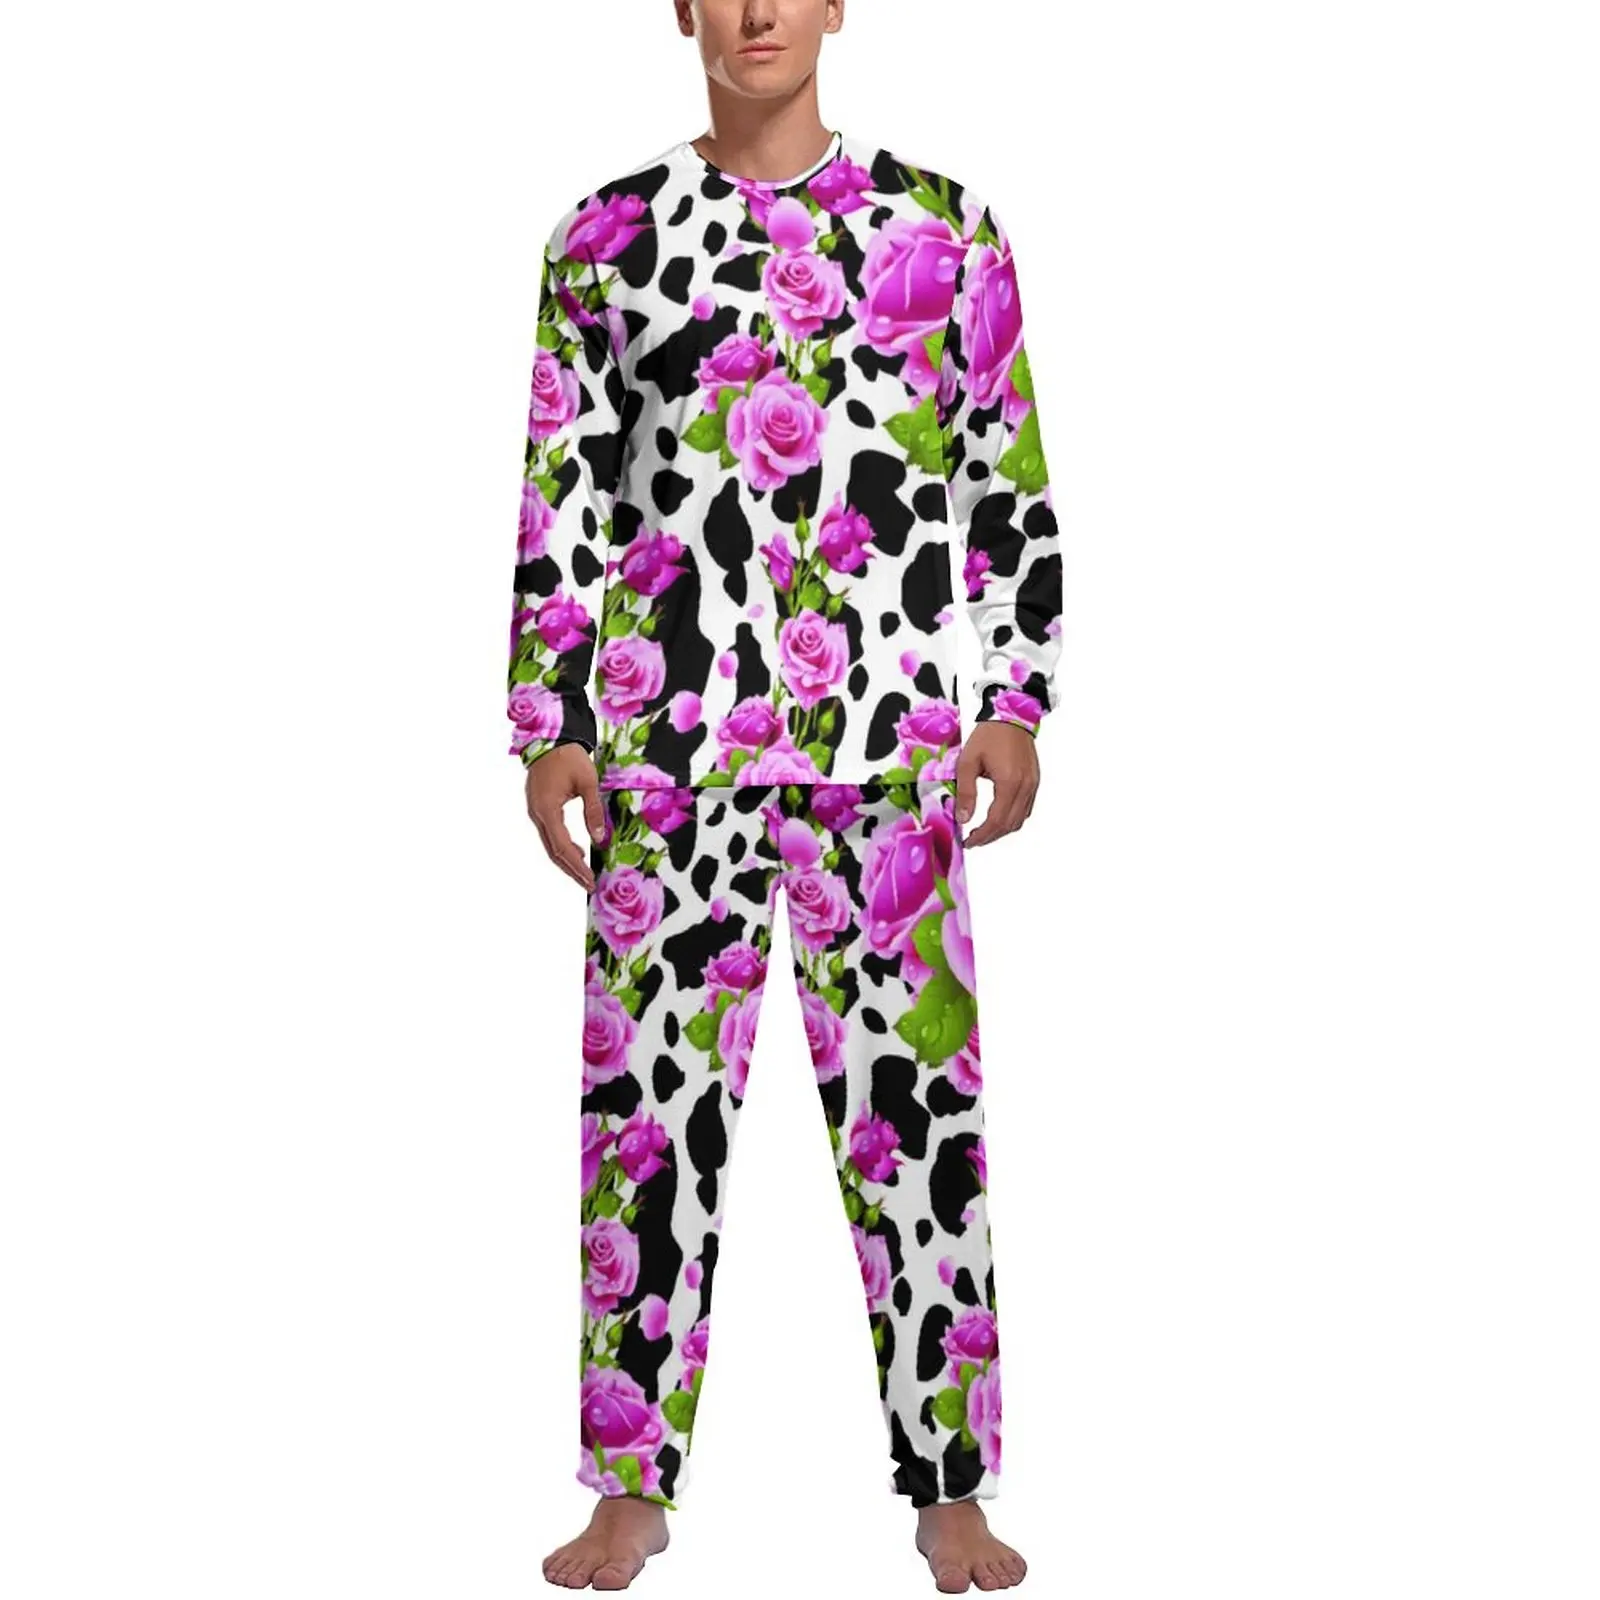 

Cow Print And Roses Placed Pajamas Spring Cow Spots Flower Sleep Home Suit Man 2 Piece Graphic Long Sleeves Soft Pajamas Set